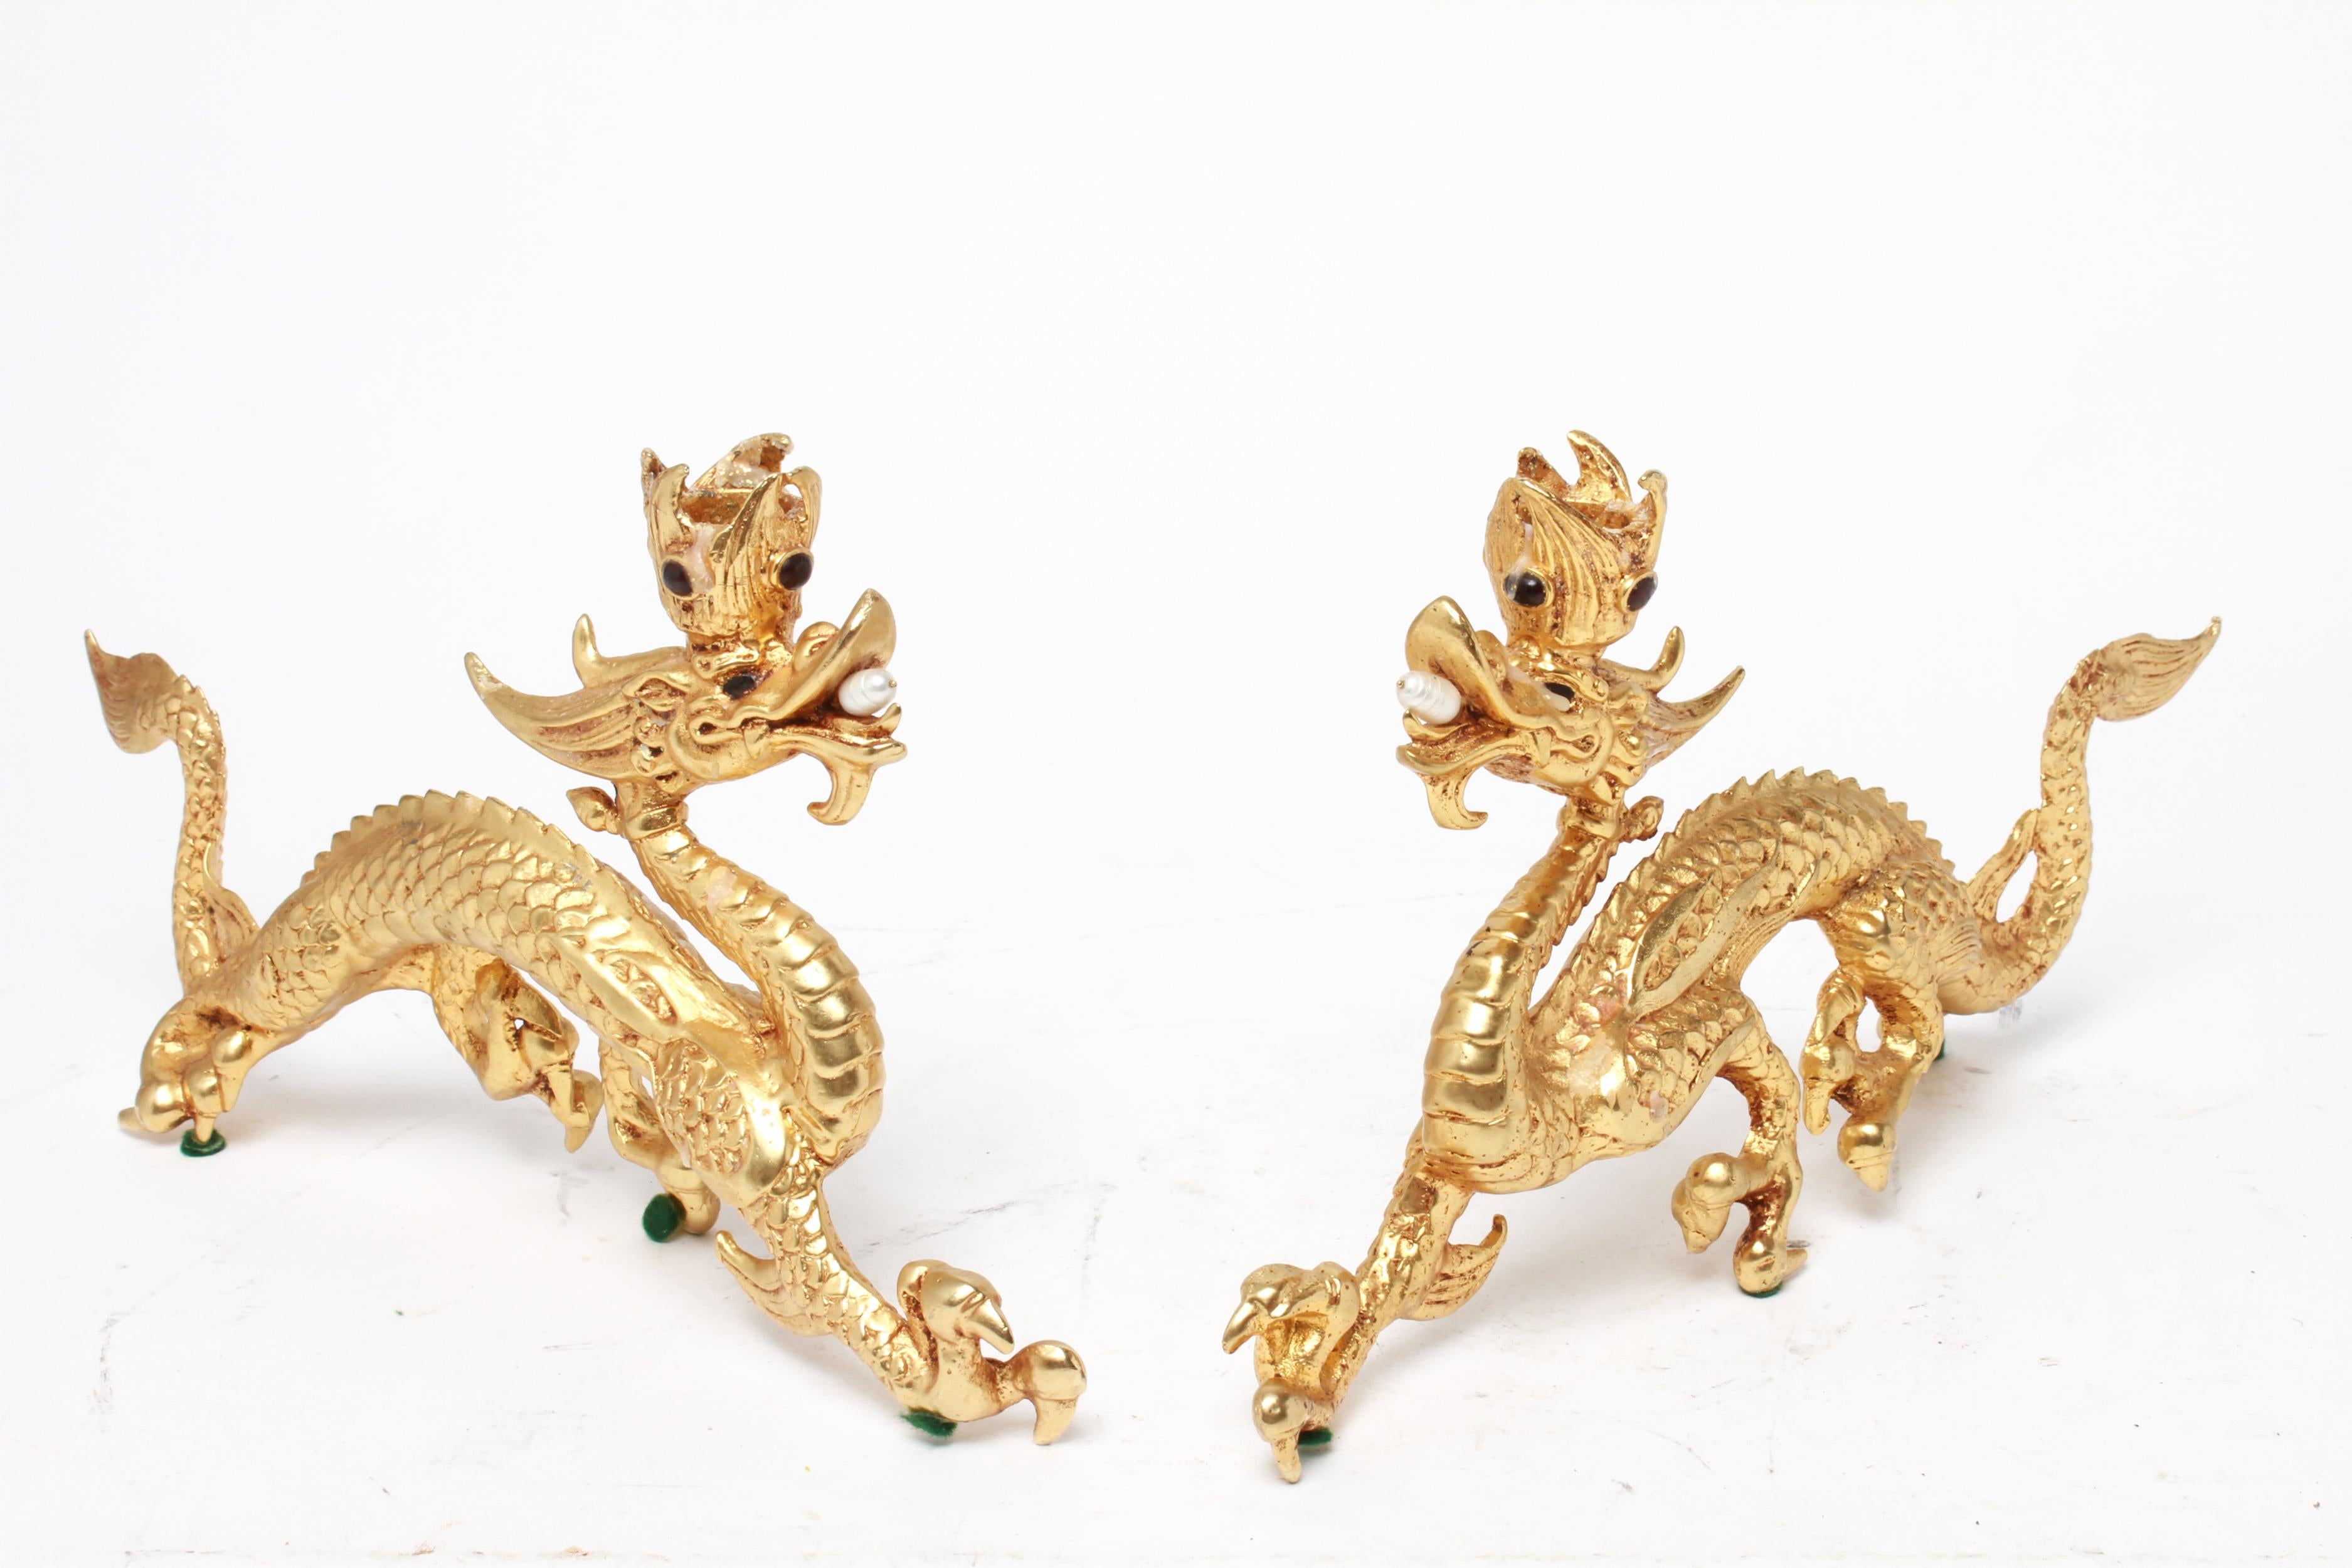 Asian Style pair of candleholders in gilt metal in the shape of dragons, with onyx eyes and pearls in their mouth, the candleholder having garnet inserts. The pair is in great vintage condition with age-appropriate wear.